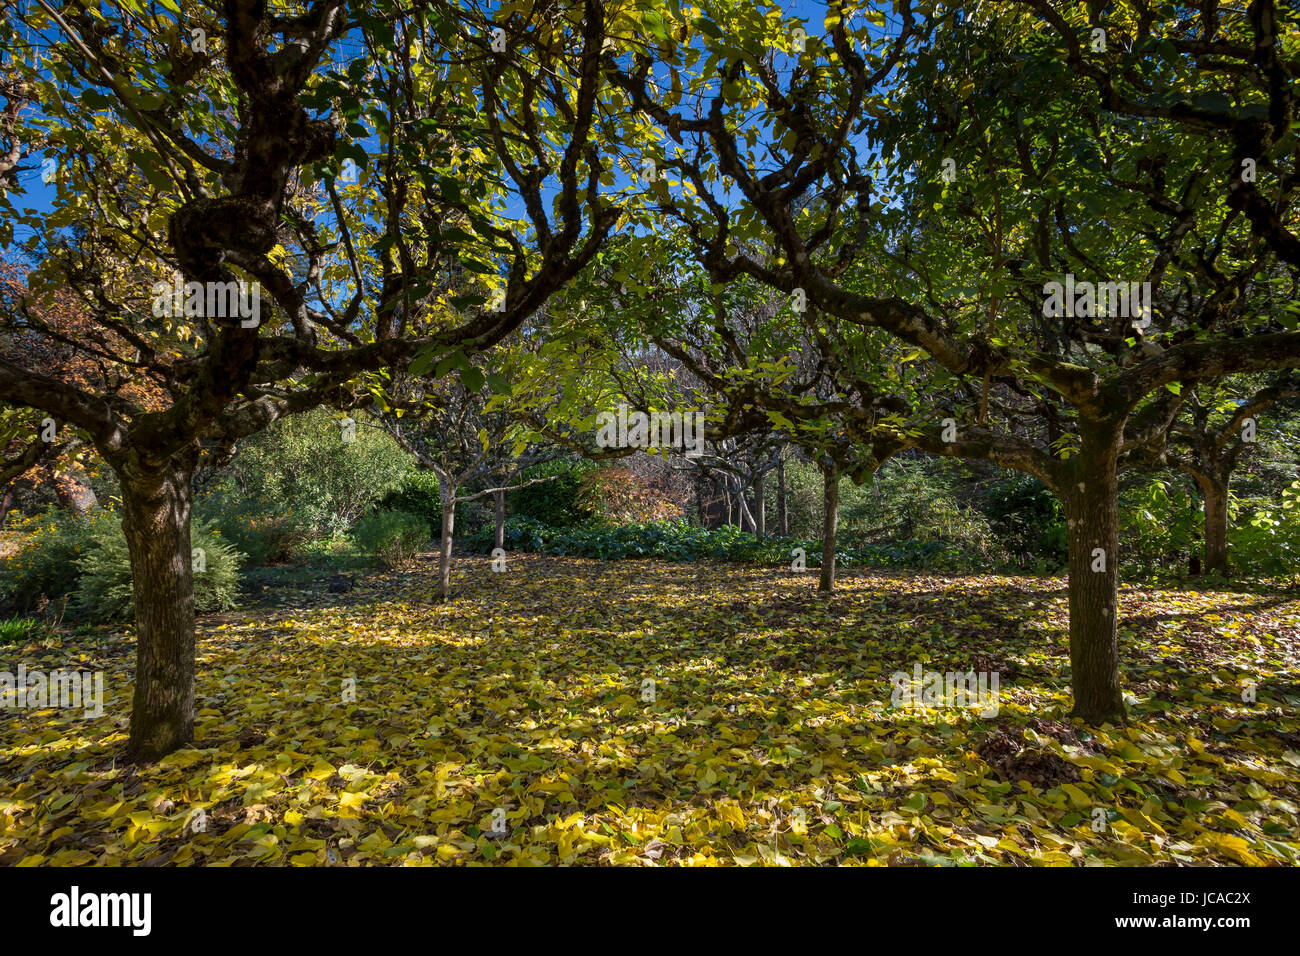 autumn leaves, Mulberry trees, autumn color, Schramsberg Vineyards, Calistoga, Napa Valley, California, United States, North America Stock Photo